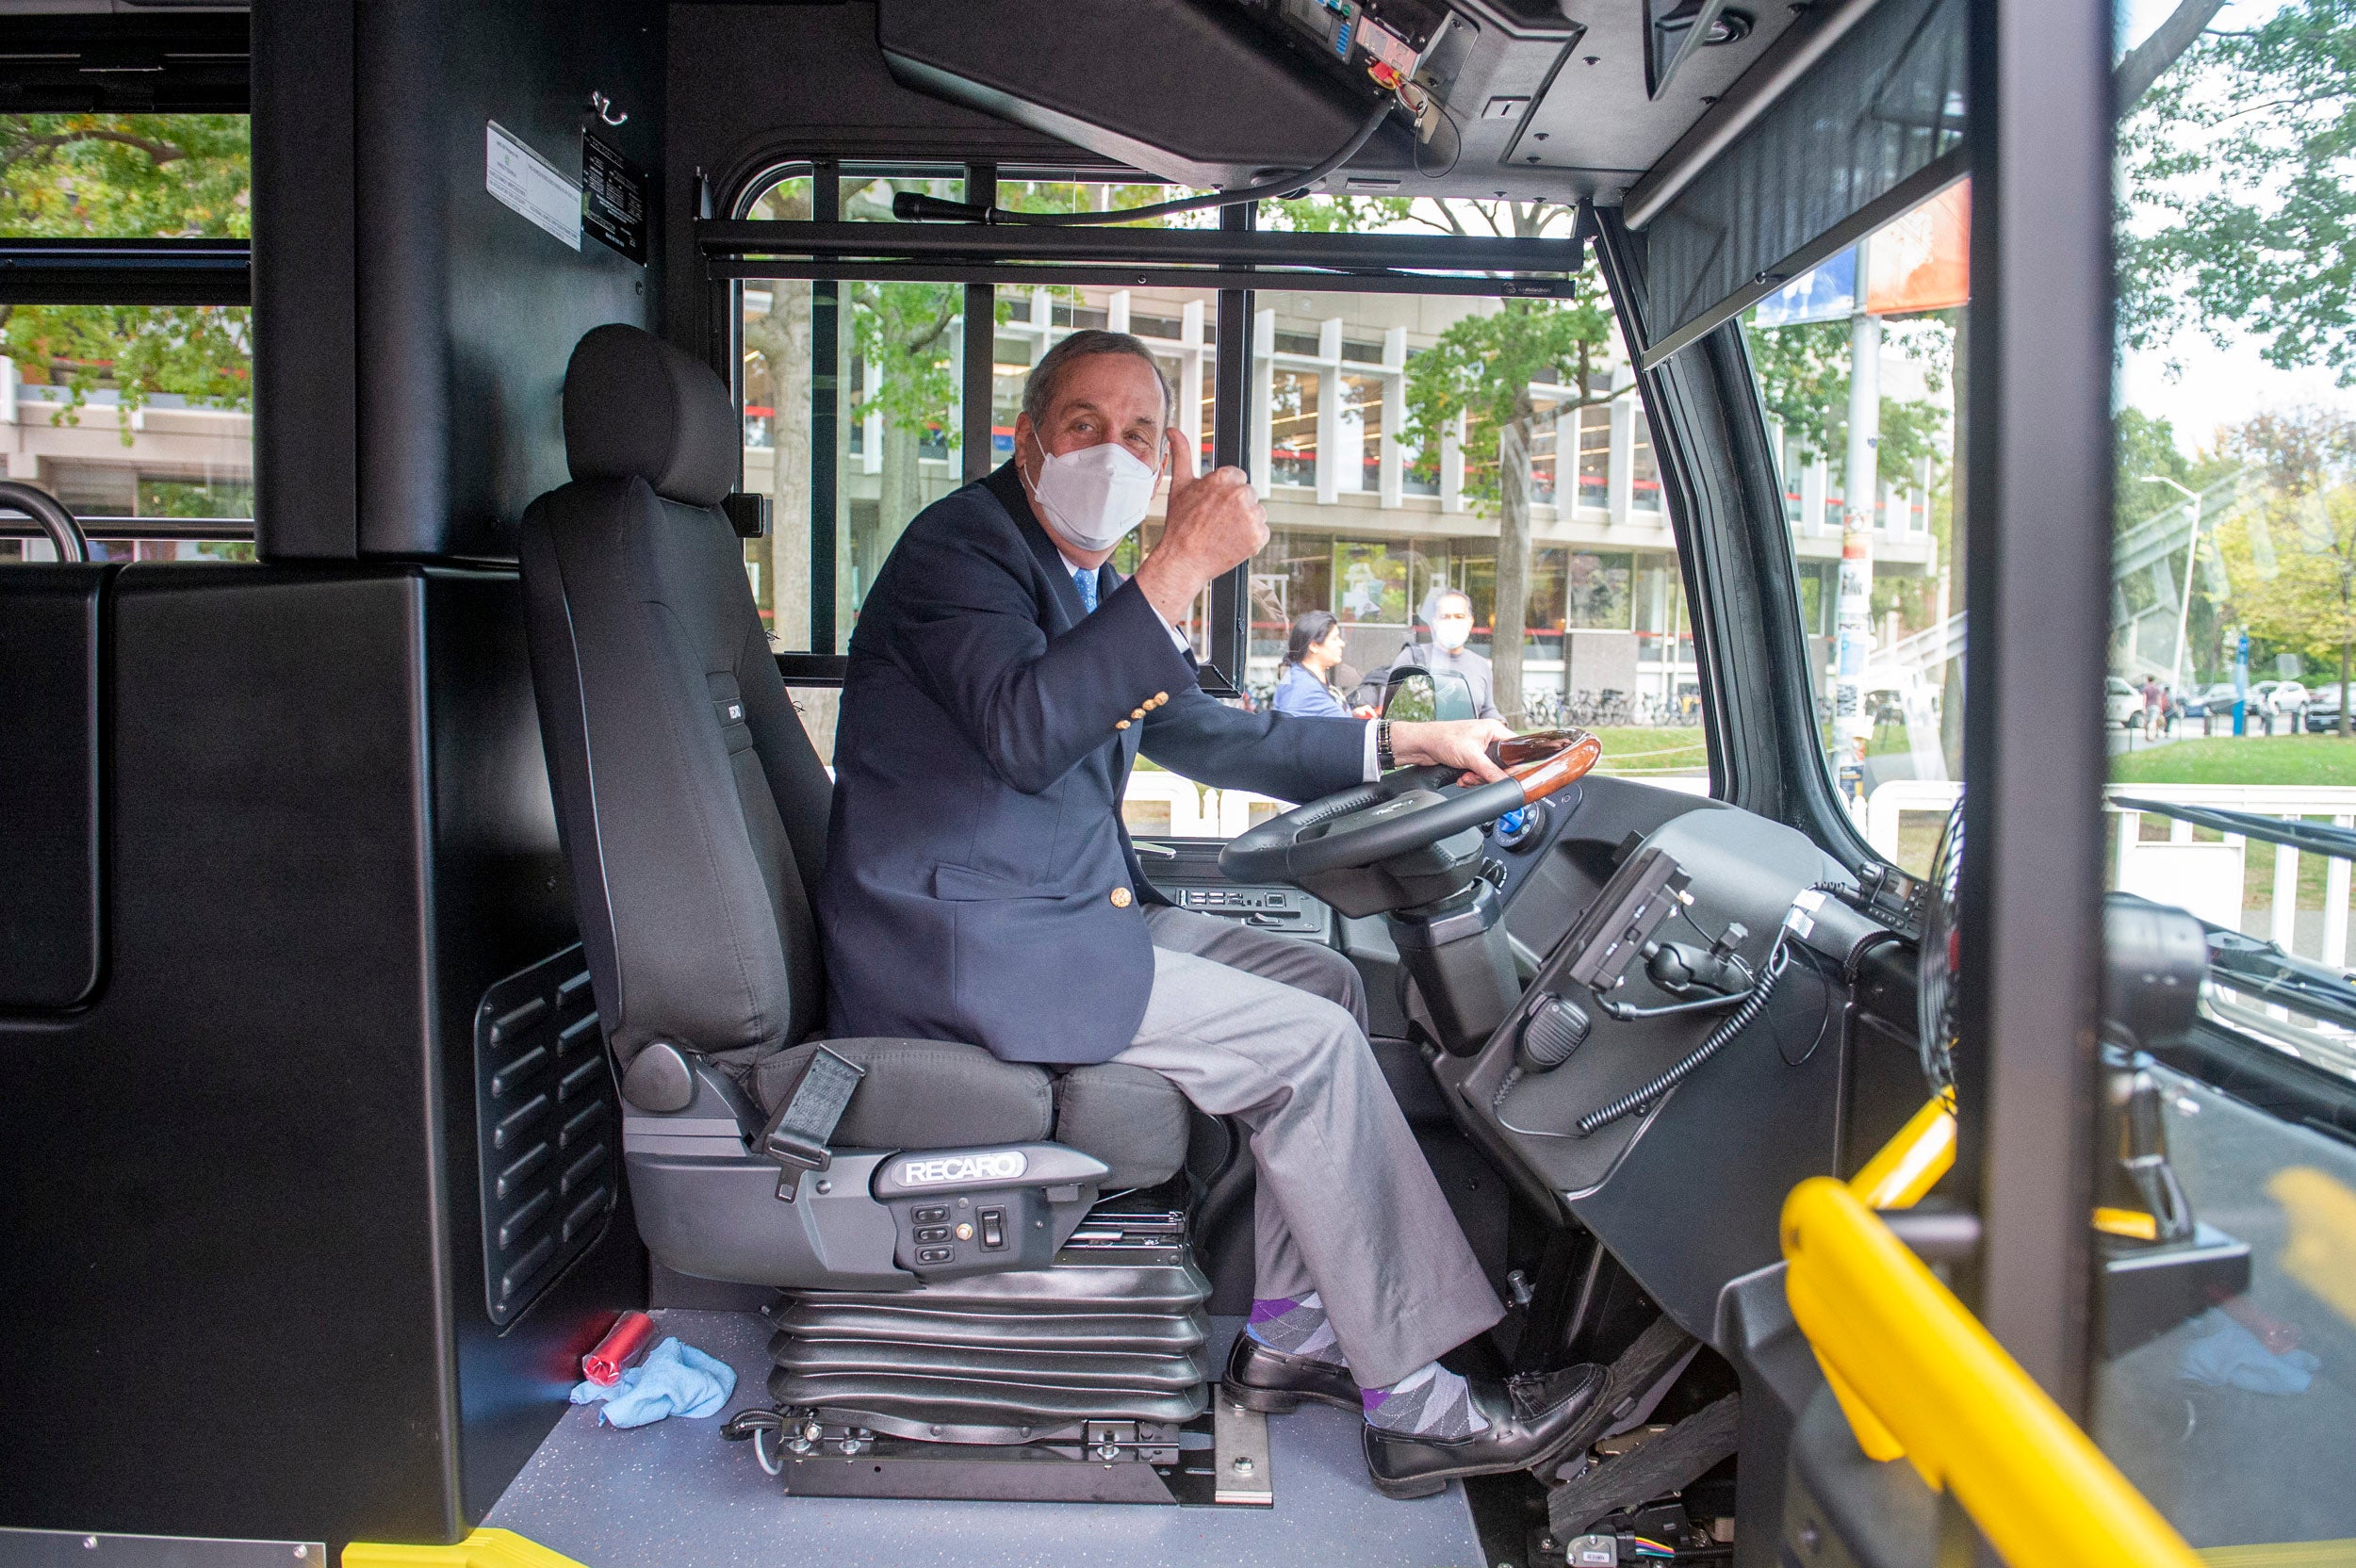 When Harvard unveiled a fleet of electric buses in October 2021, Bacow sat behind the wheel and